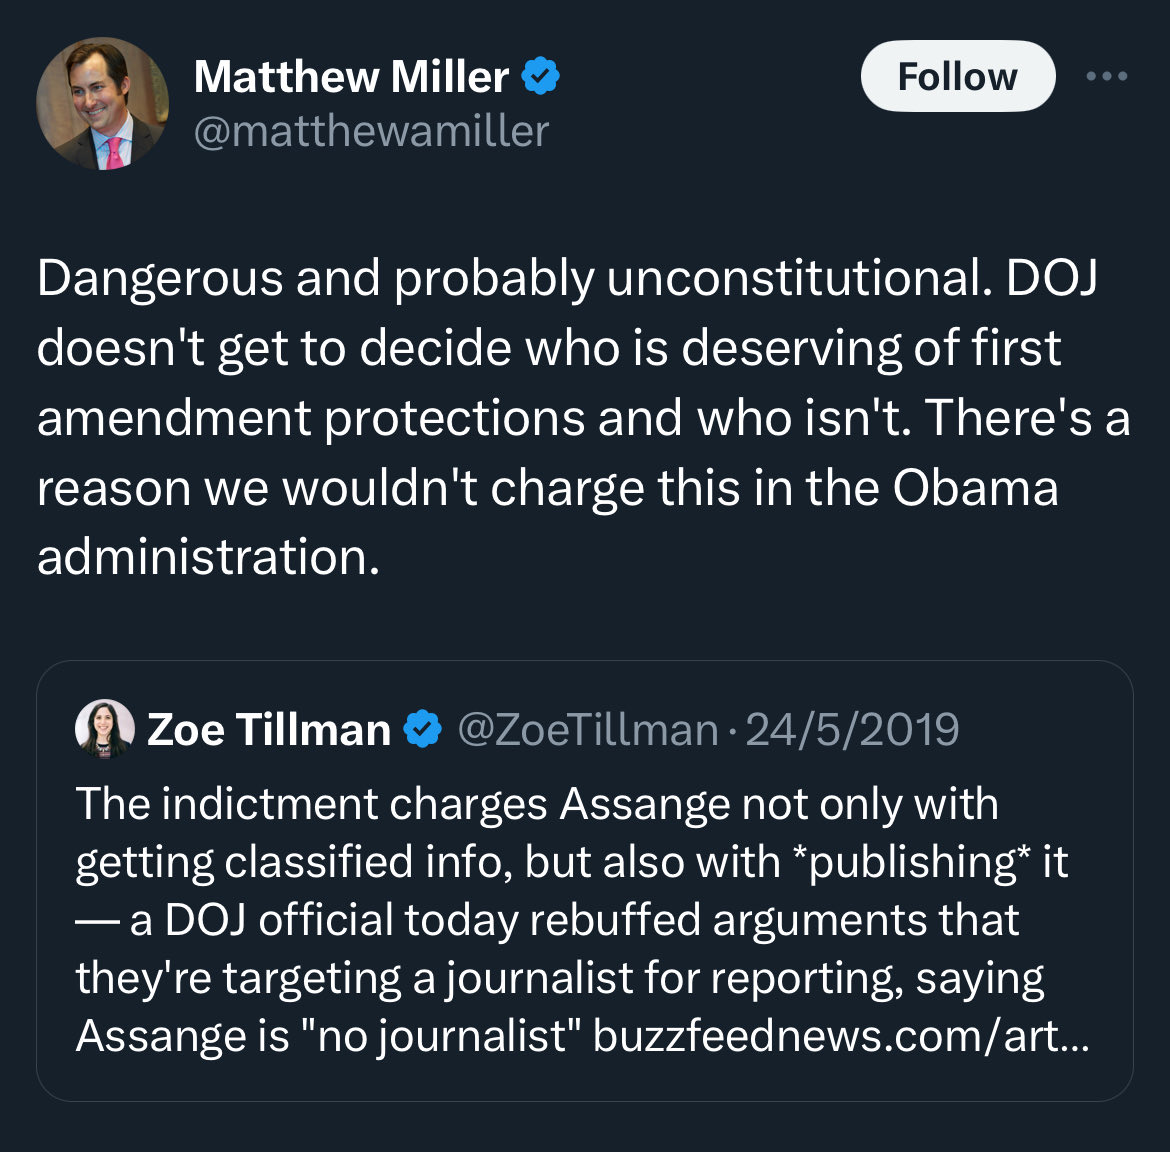 Current State Department spokesman back in 2019 called the prosecution of Julian Assange Dangerous and unconstitutional. Today is the 5th Anniversary in Belmarsh Prison for something he had the right to do.